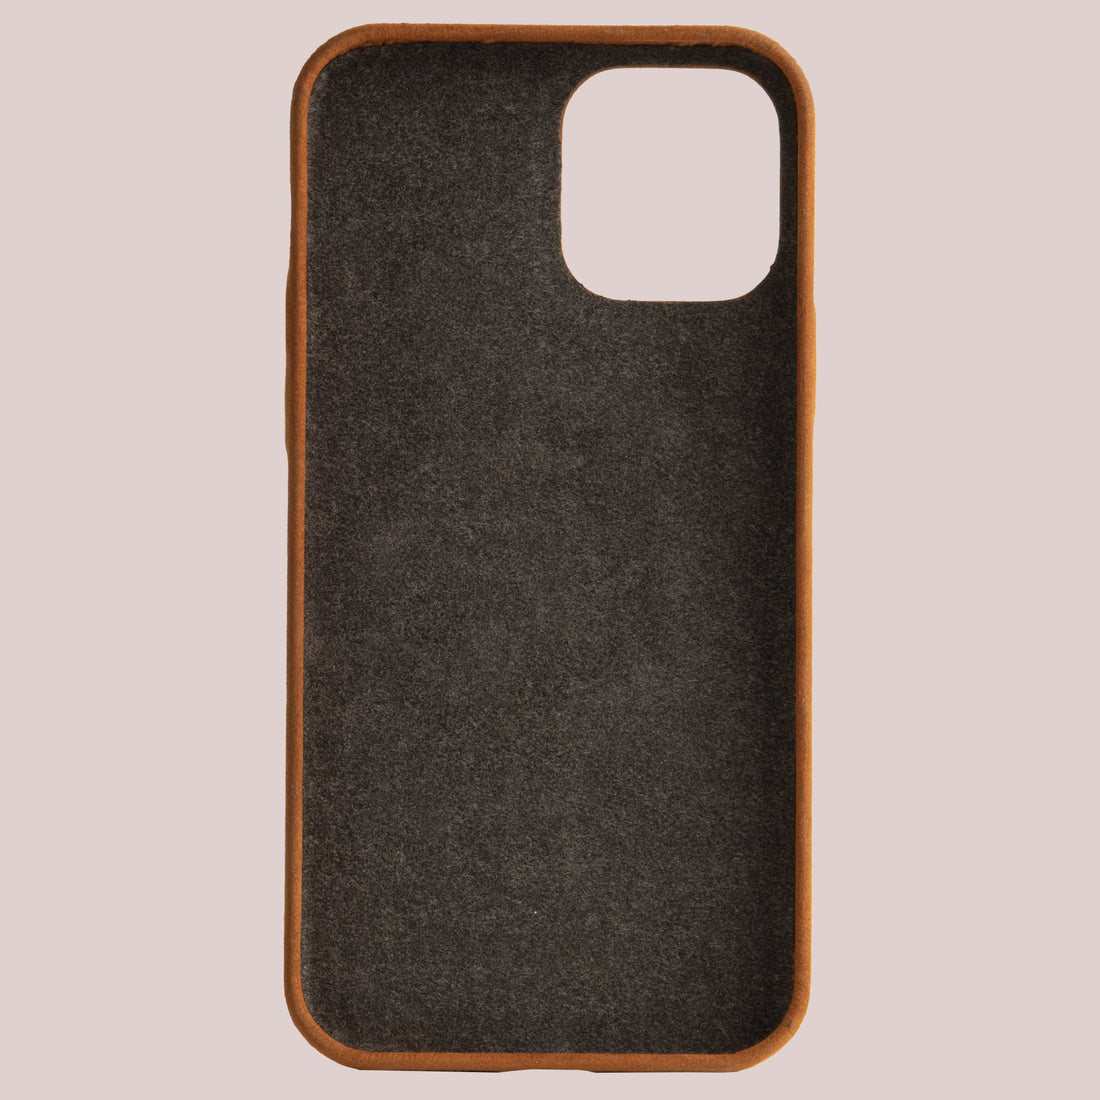 Baxter Card Case for iPhone 12 Pro Max - Cognac